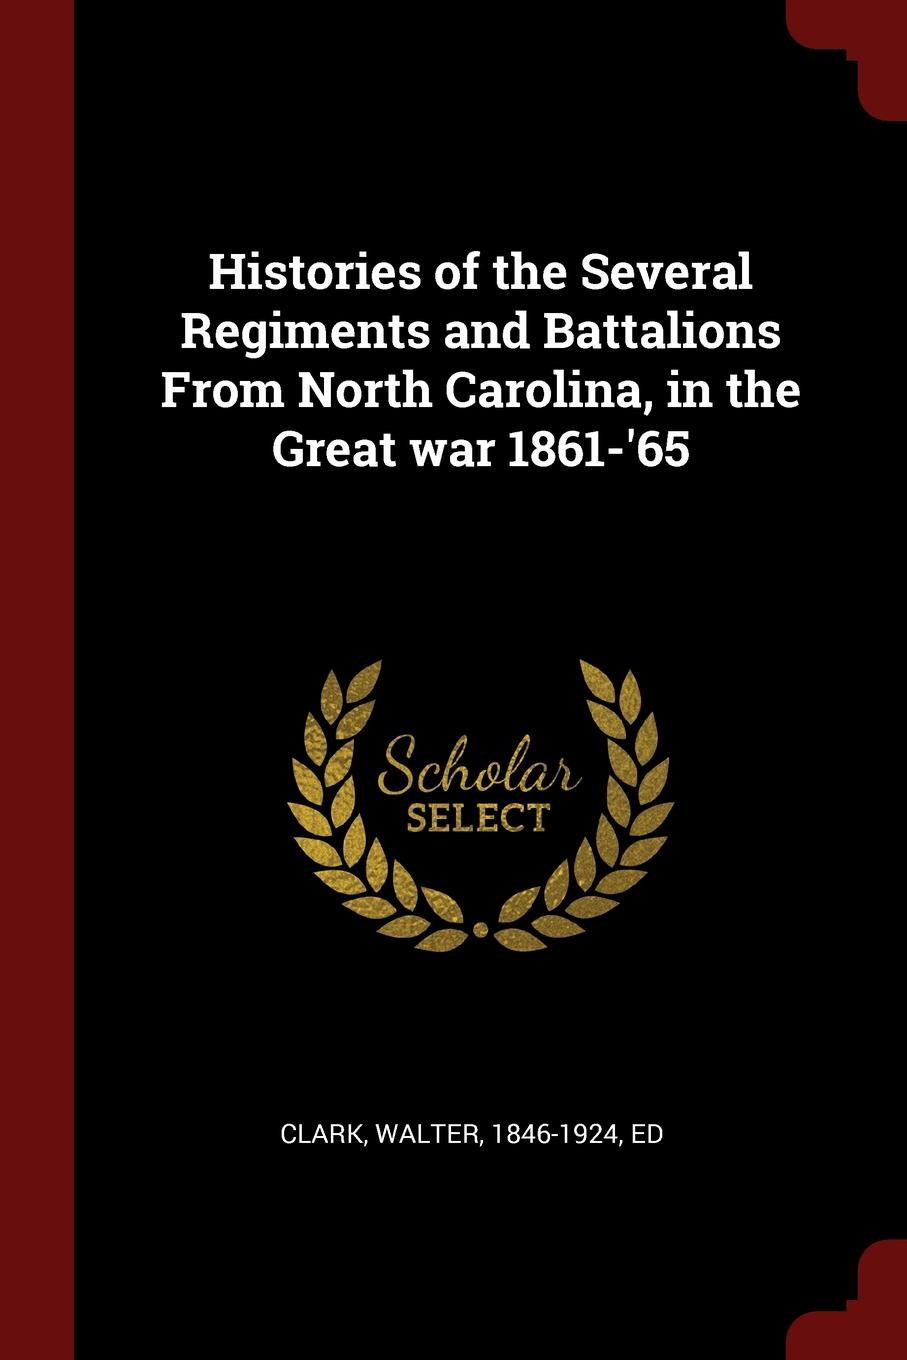 Histories of the Several Regiments and Battalions From North Carolina, in the Great war 1861-.65